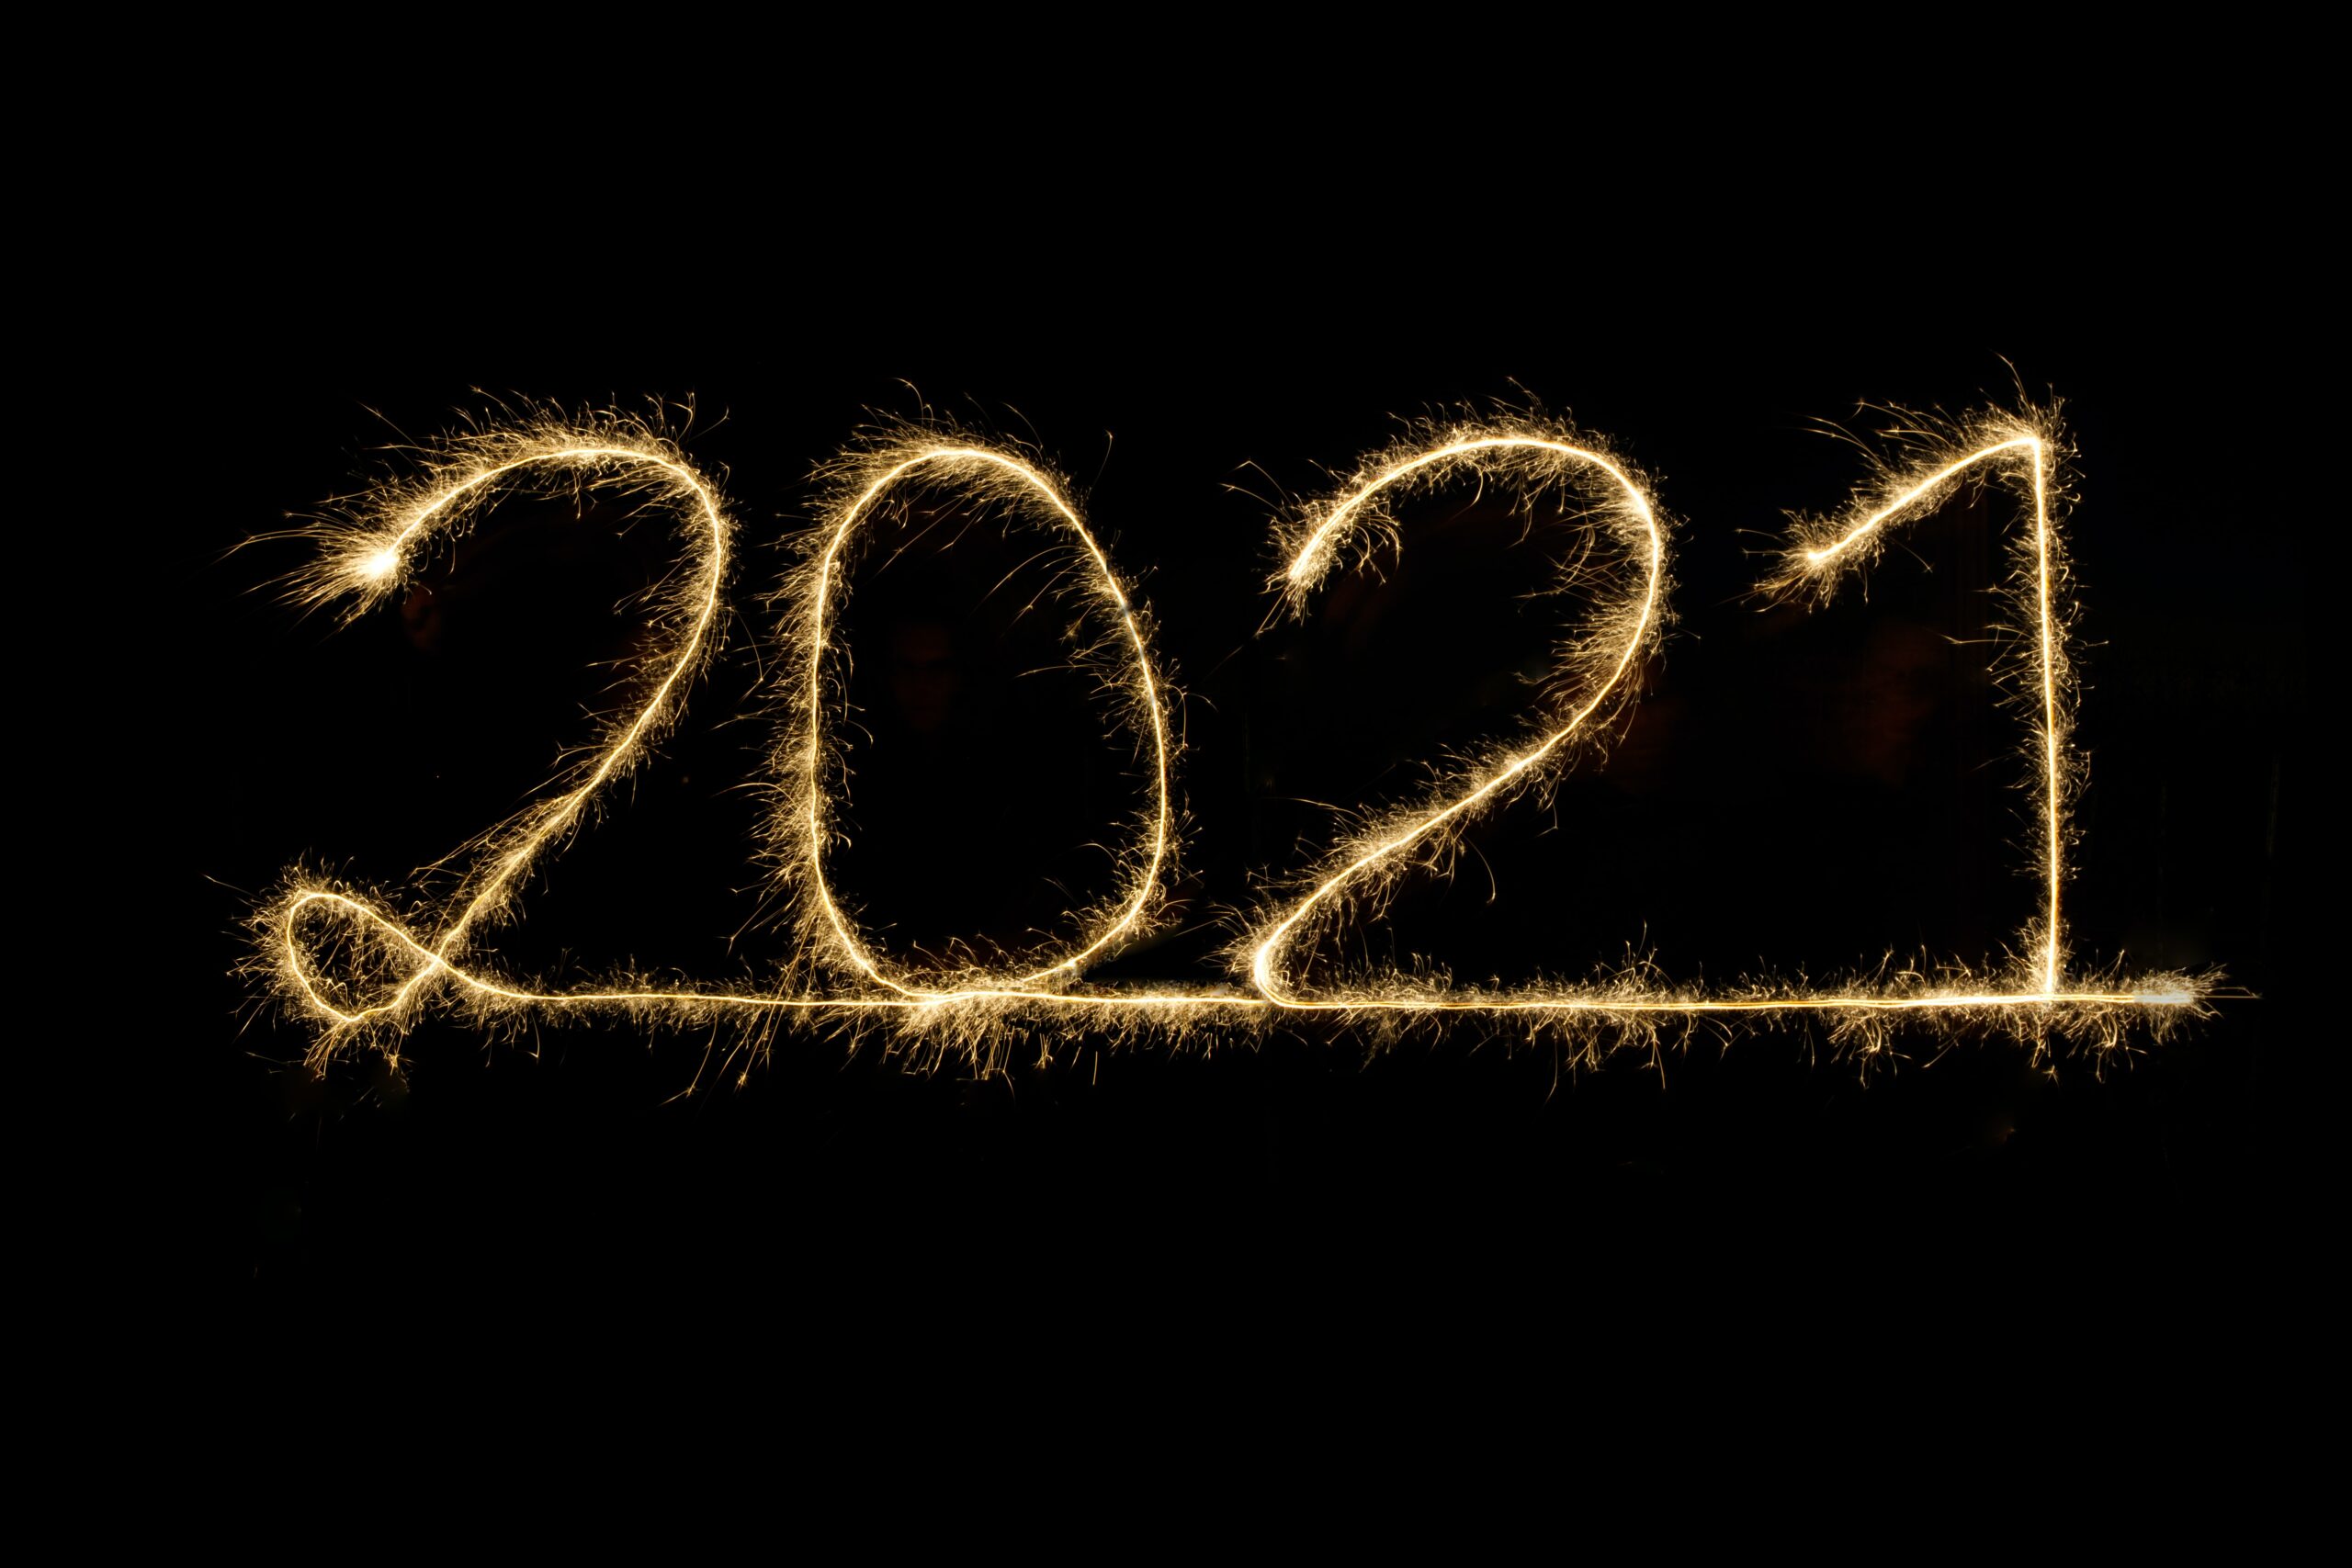 2021 – The Year to Get Ahead